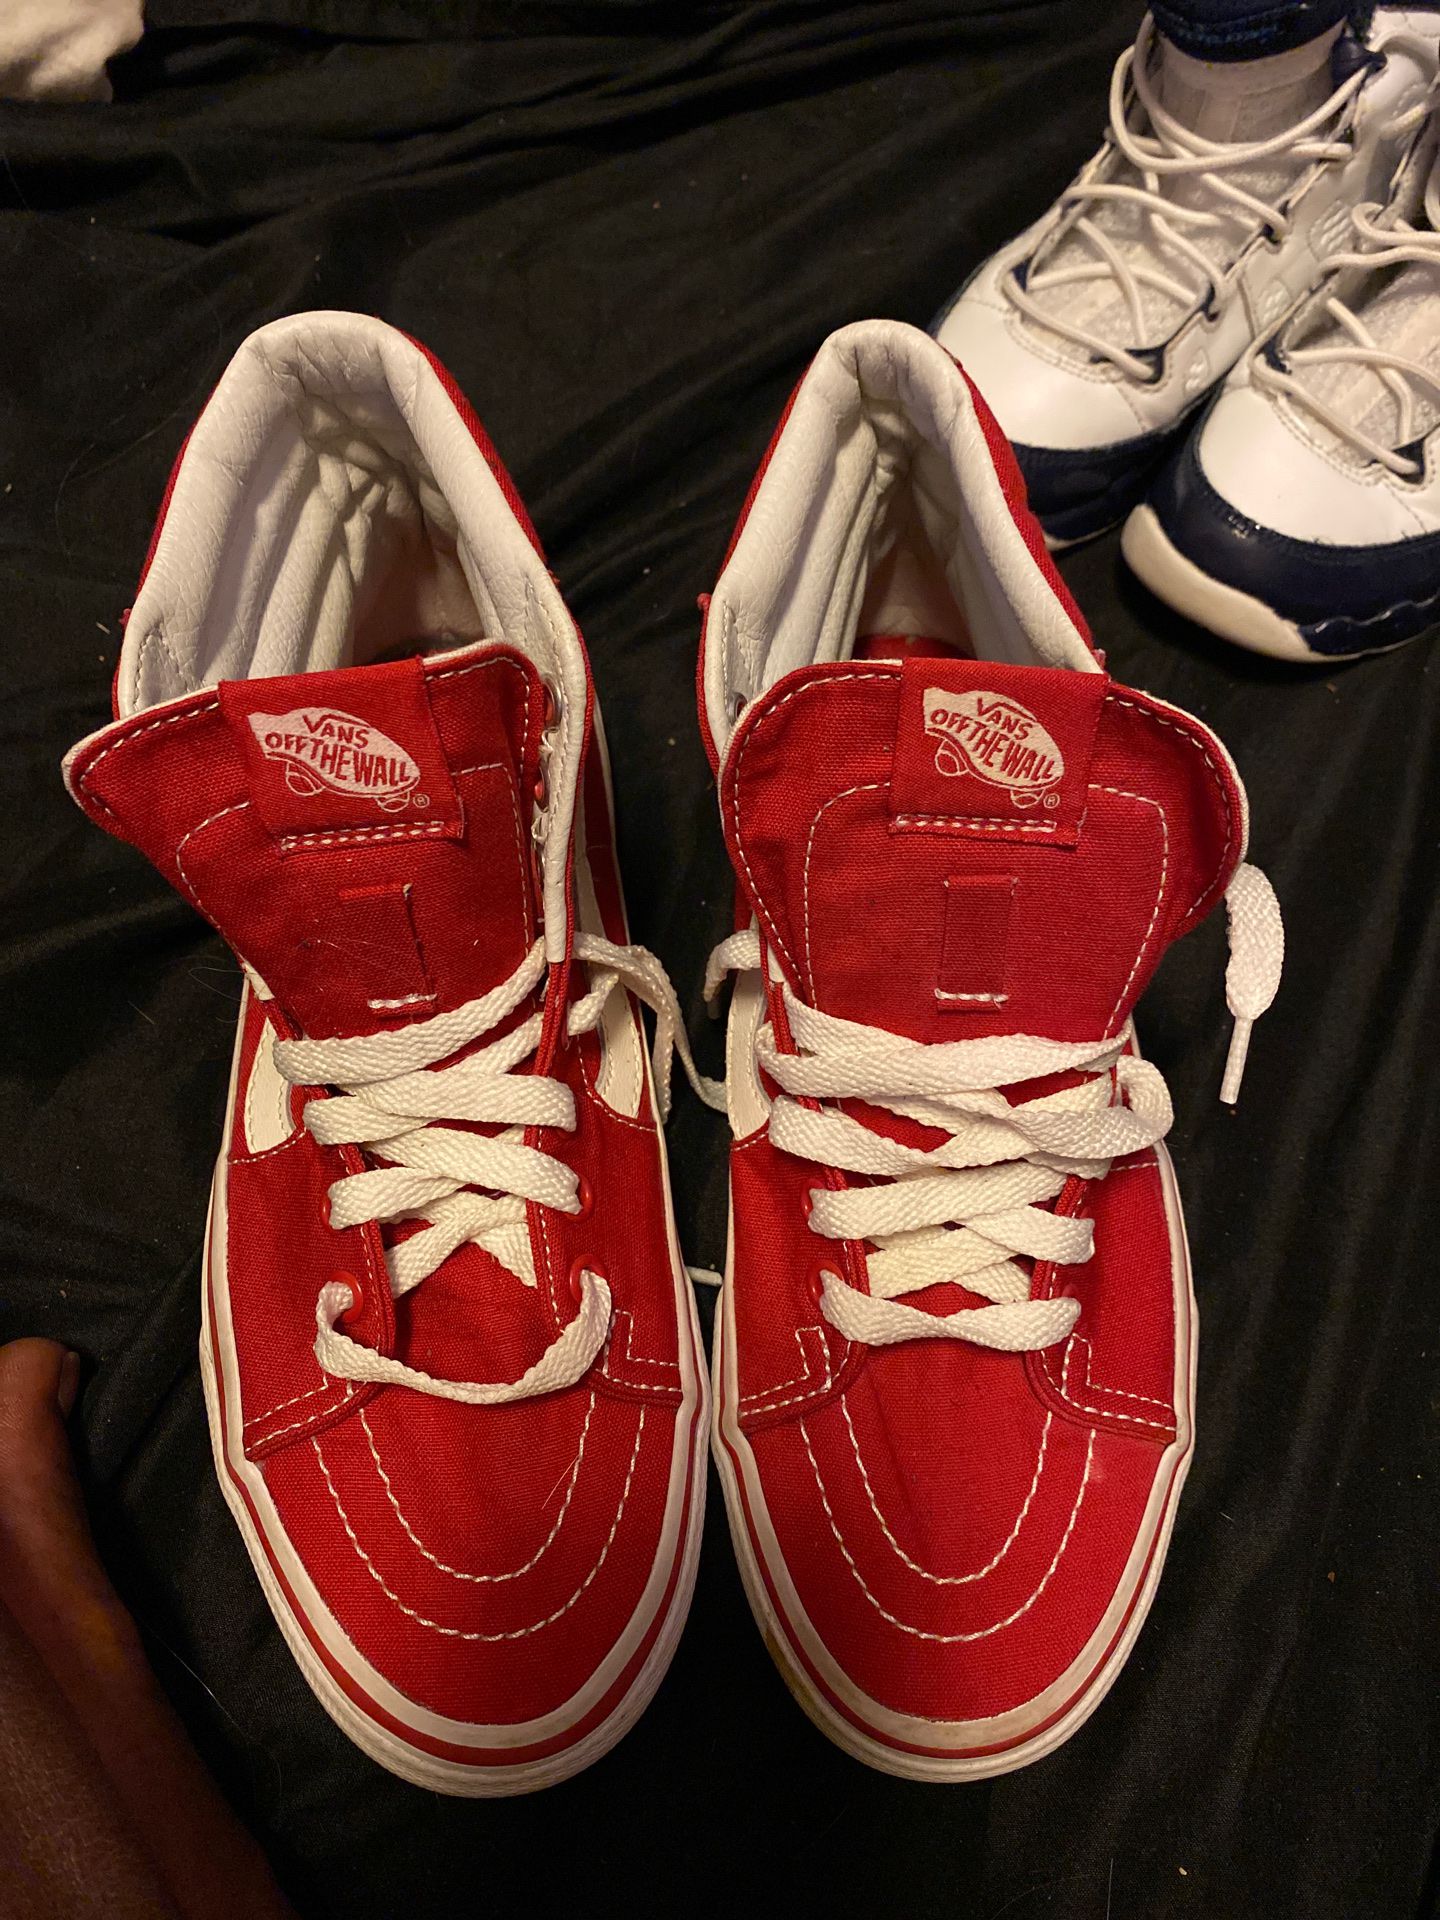 All red vans